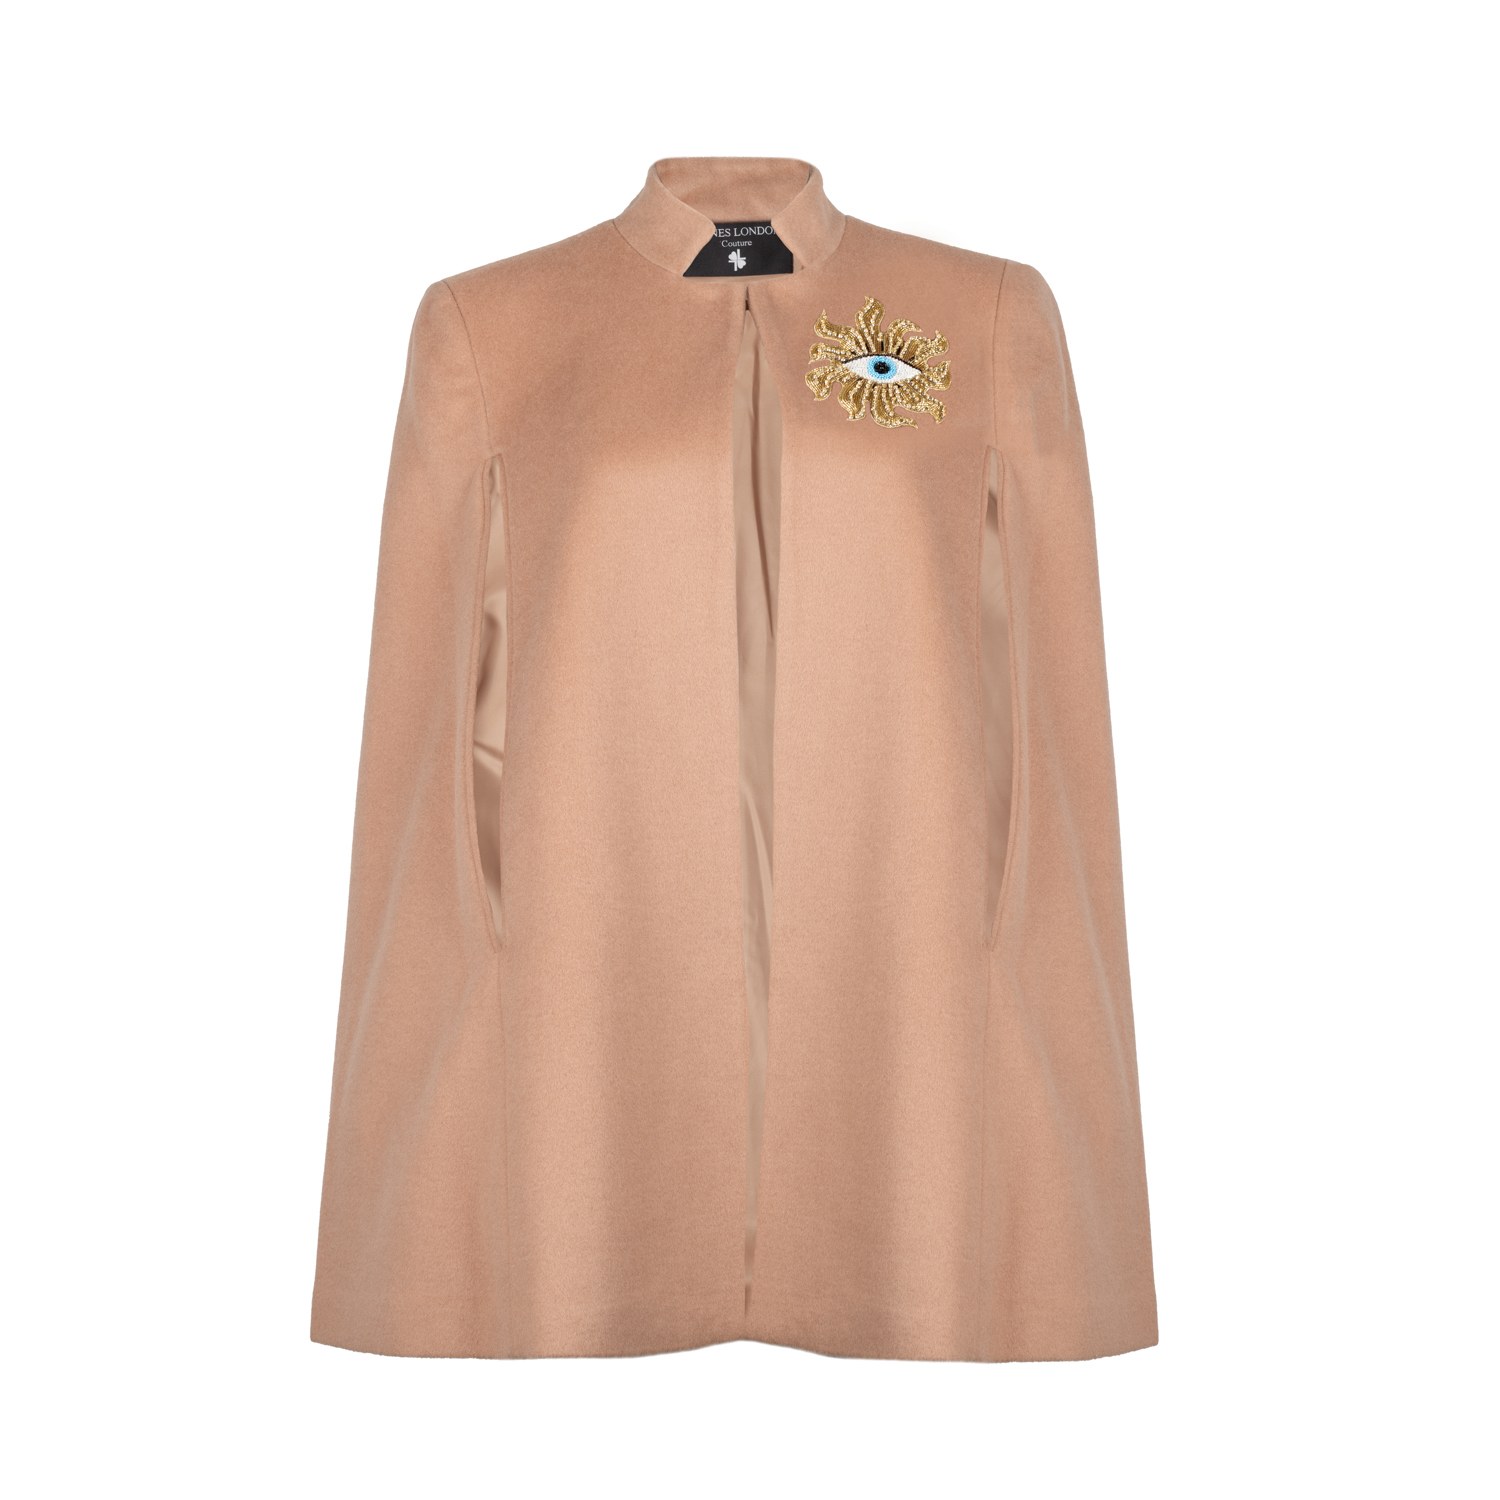 Women’s Neutrals Laines Couture Wool Blend Cape With Embellished Mystic Eye - Camel L/Xl Laines London